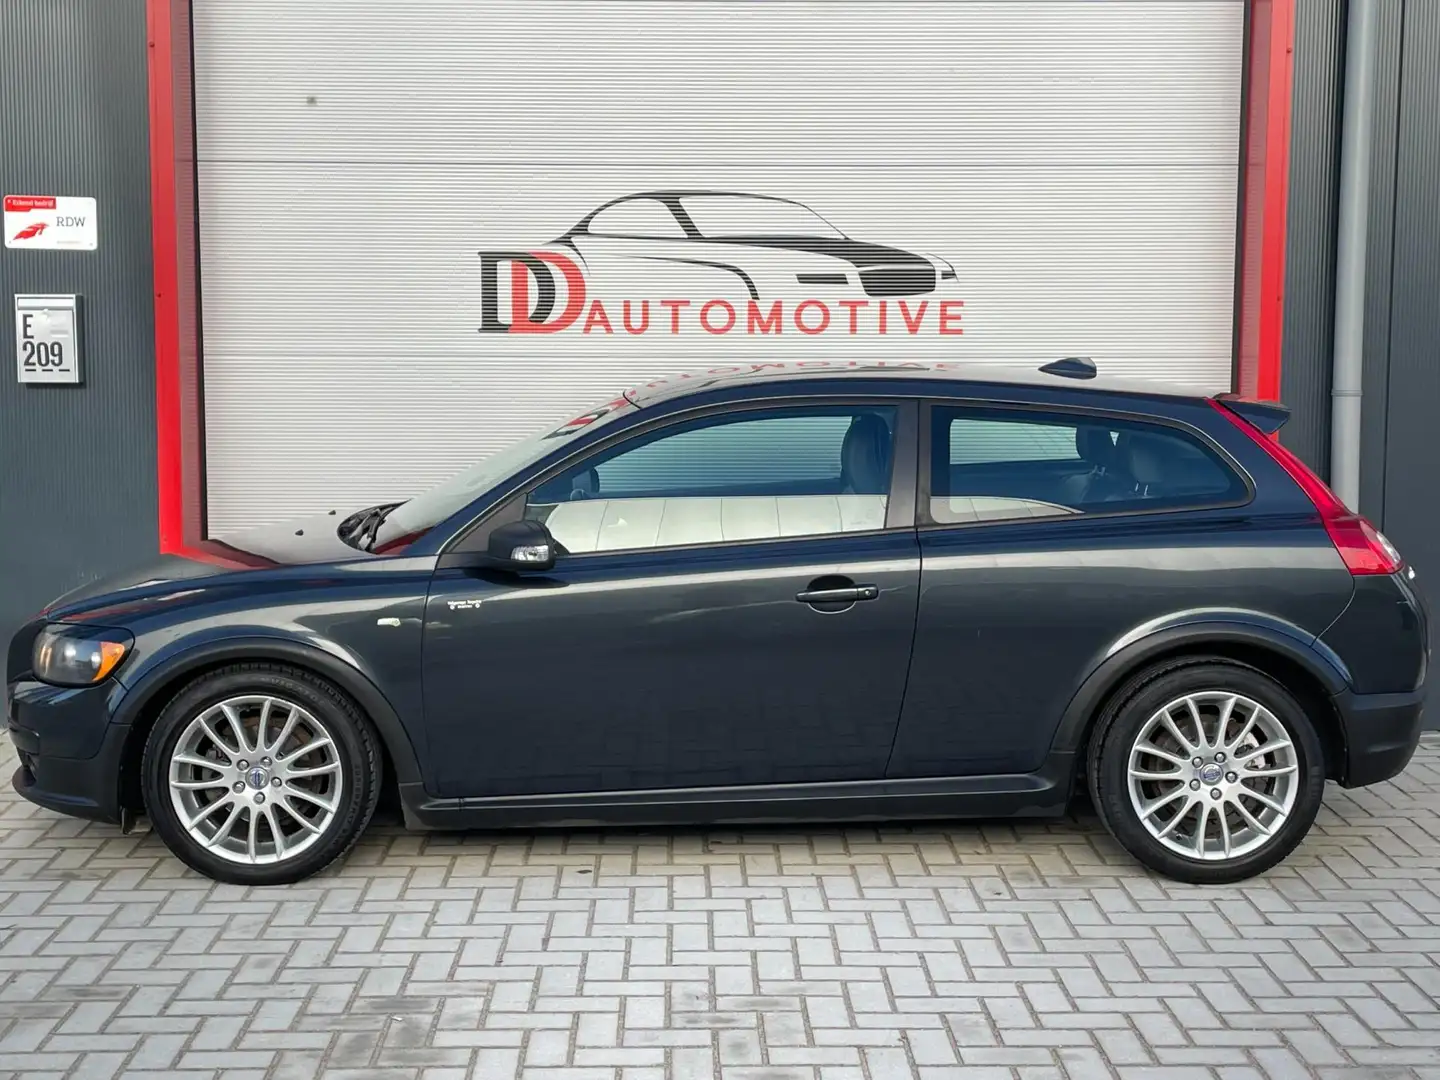 Volvo C30 1.6D DRIVe Sport LEER/PDC/CRUISE/DEALEROH/NAP/ORGN siva - 2